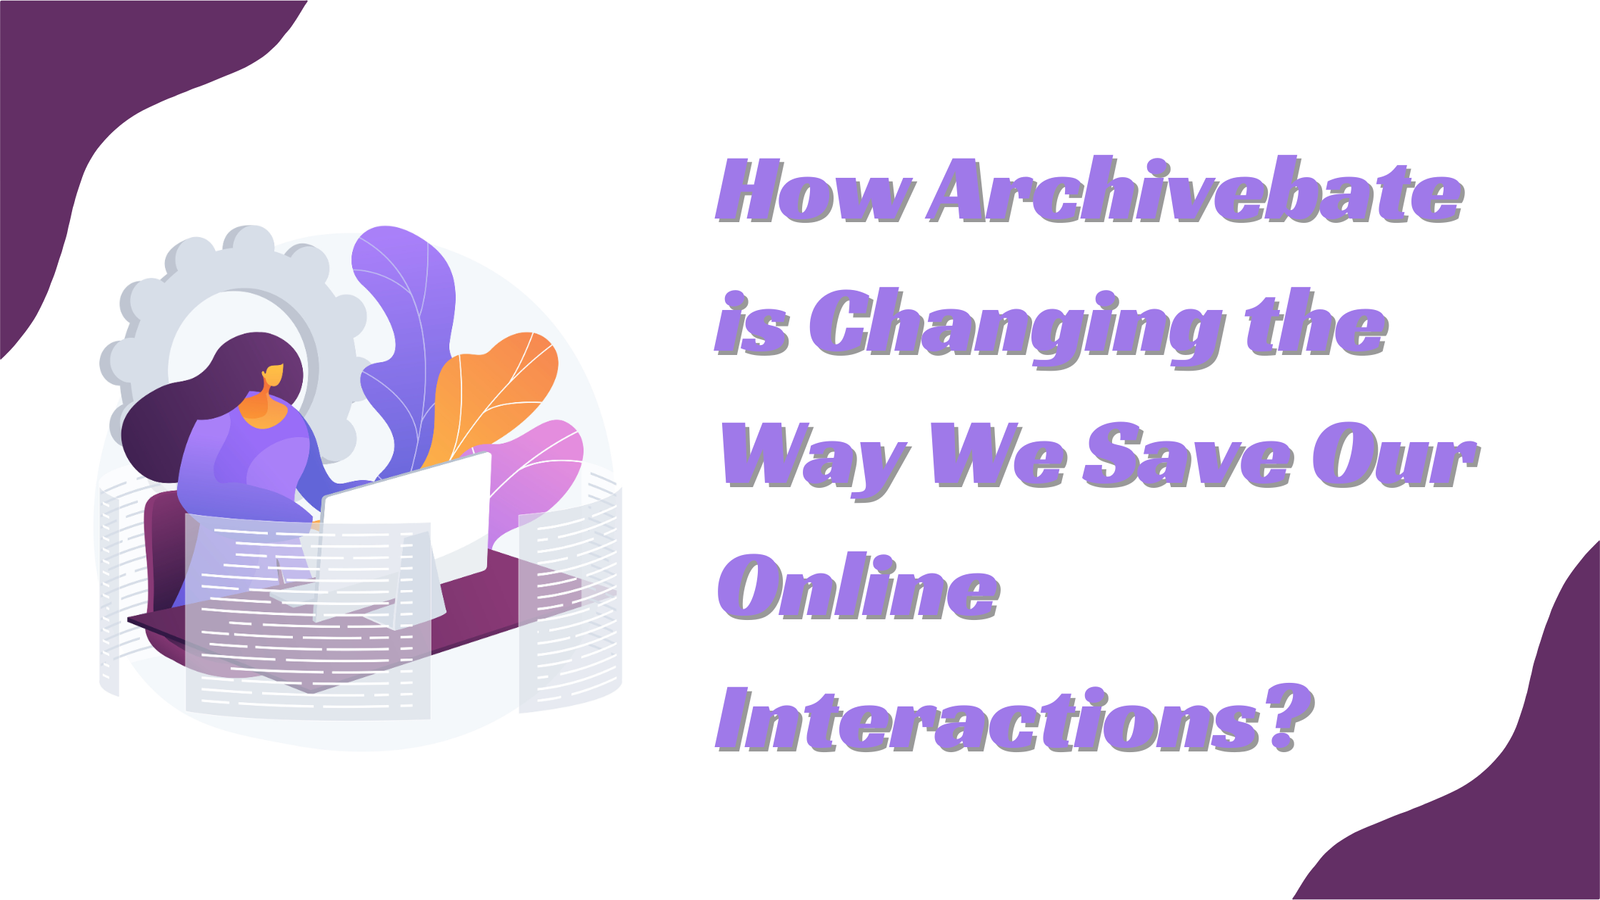 How Archivebate is Changing the Way We Save Our Online Interactions?